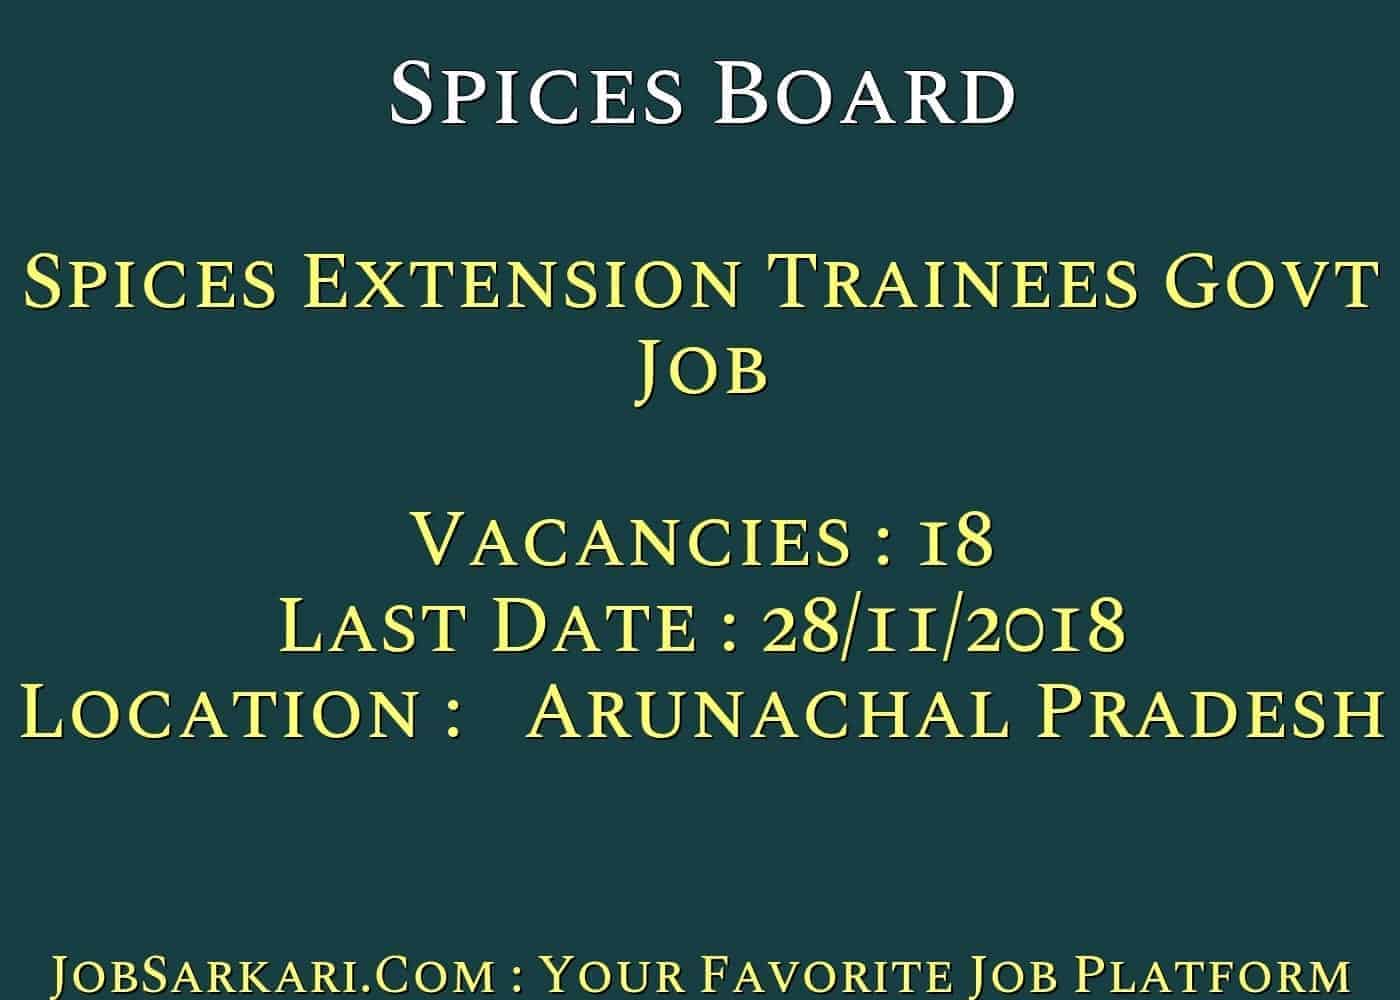 Spices Board Recruitment 2018 For Spices Extension Trainees Govt Job